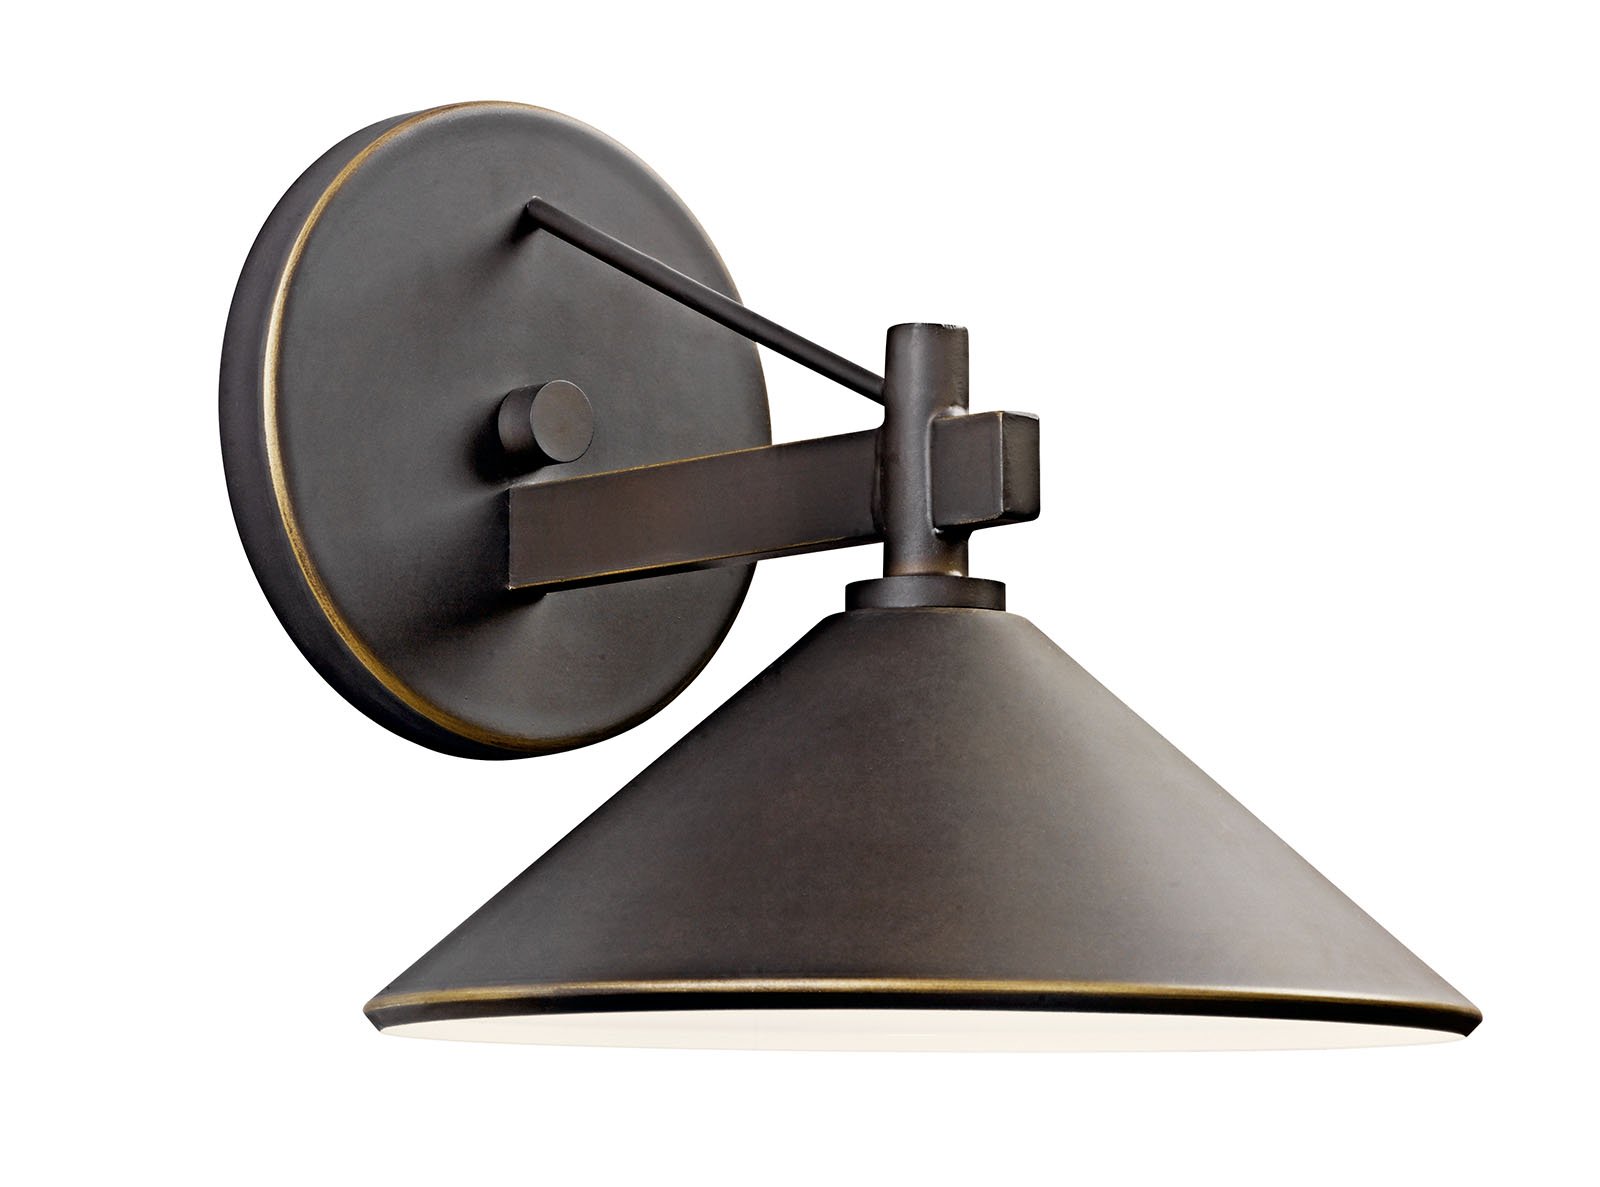 Bringing clean lines to a rustic look, the Ripley collection of outdoor lighting features an Olde Bronze finish that warms the smooth cone shape of this 1 light outdoor sconce. 8 inch width. Height 7.5 inches. Extension 9.5 inches. Rises 2.75 inches above the center of the wall opening. Uses 1 - 40W max (type R) or 1 - 60W (G type) bulb. UL listed for wet locations.  Dark sky compliant with use of R14 40W bulb.